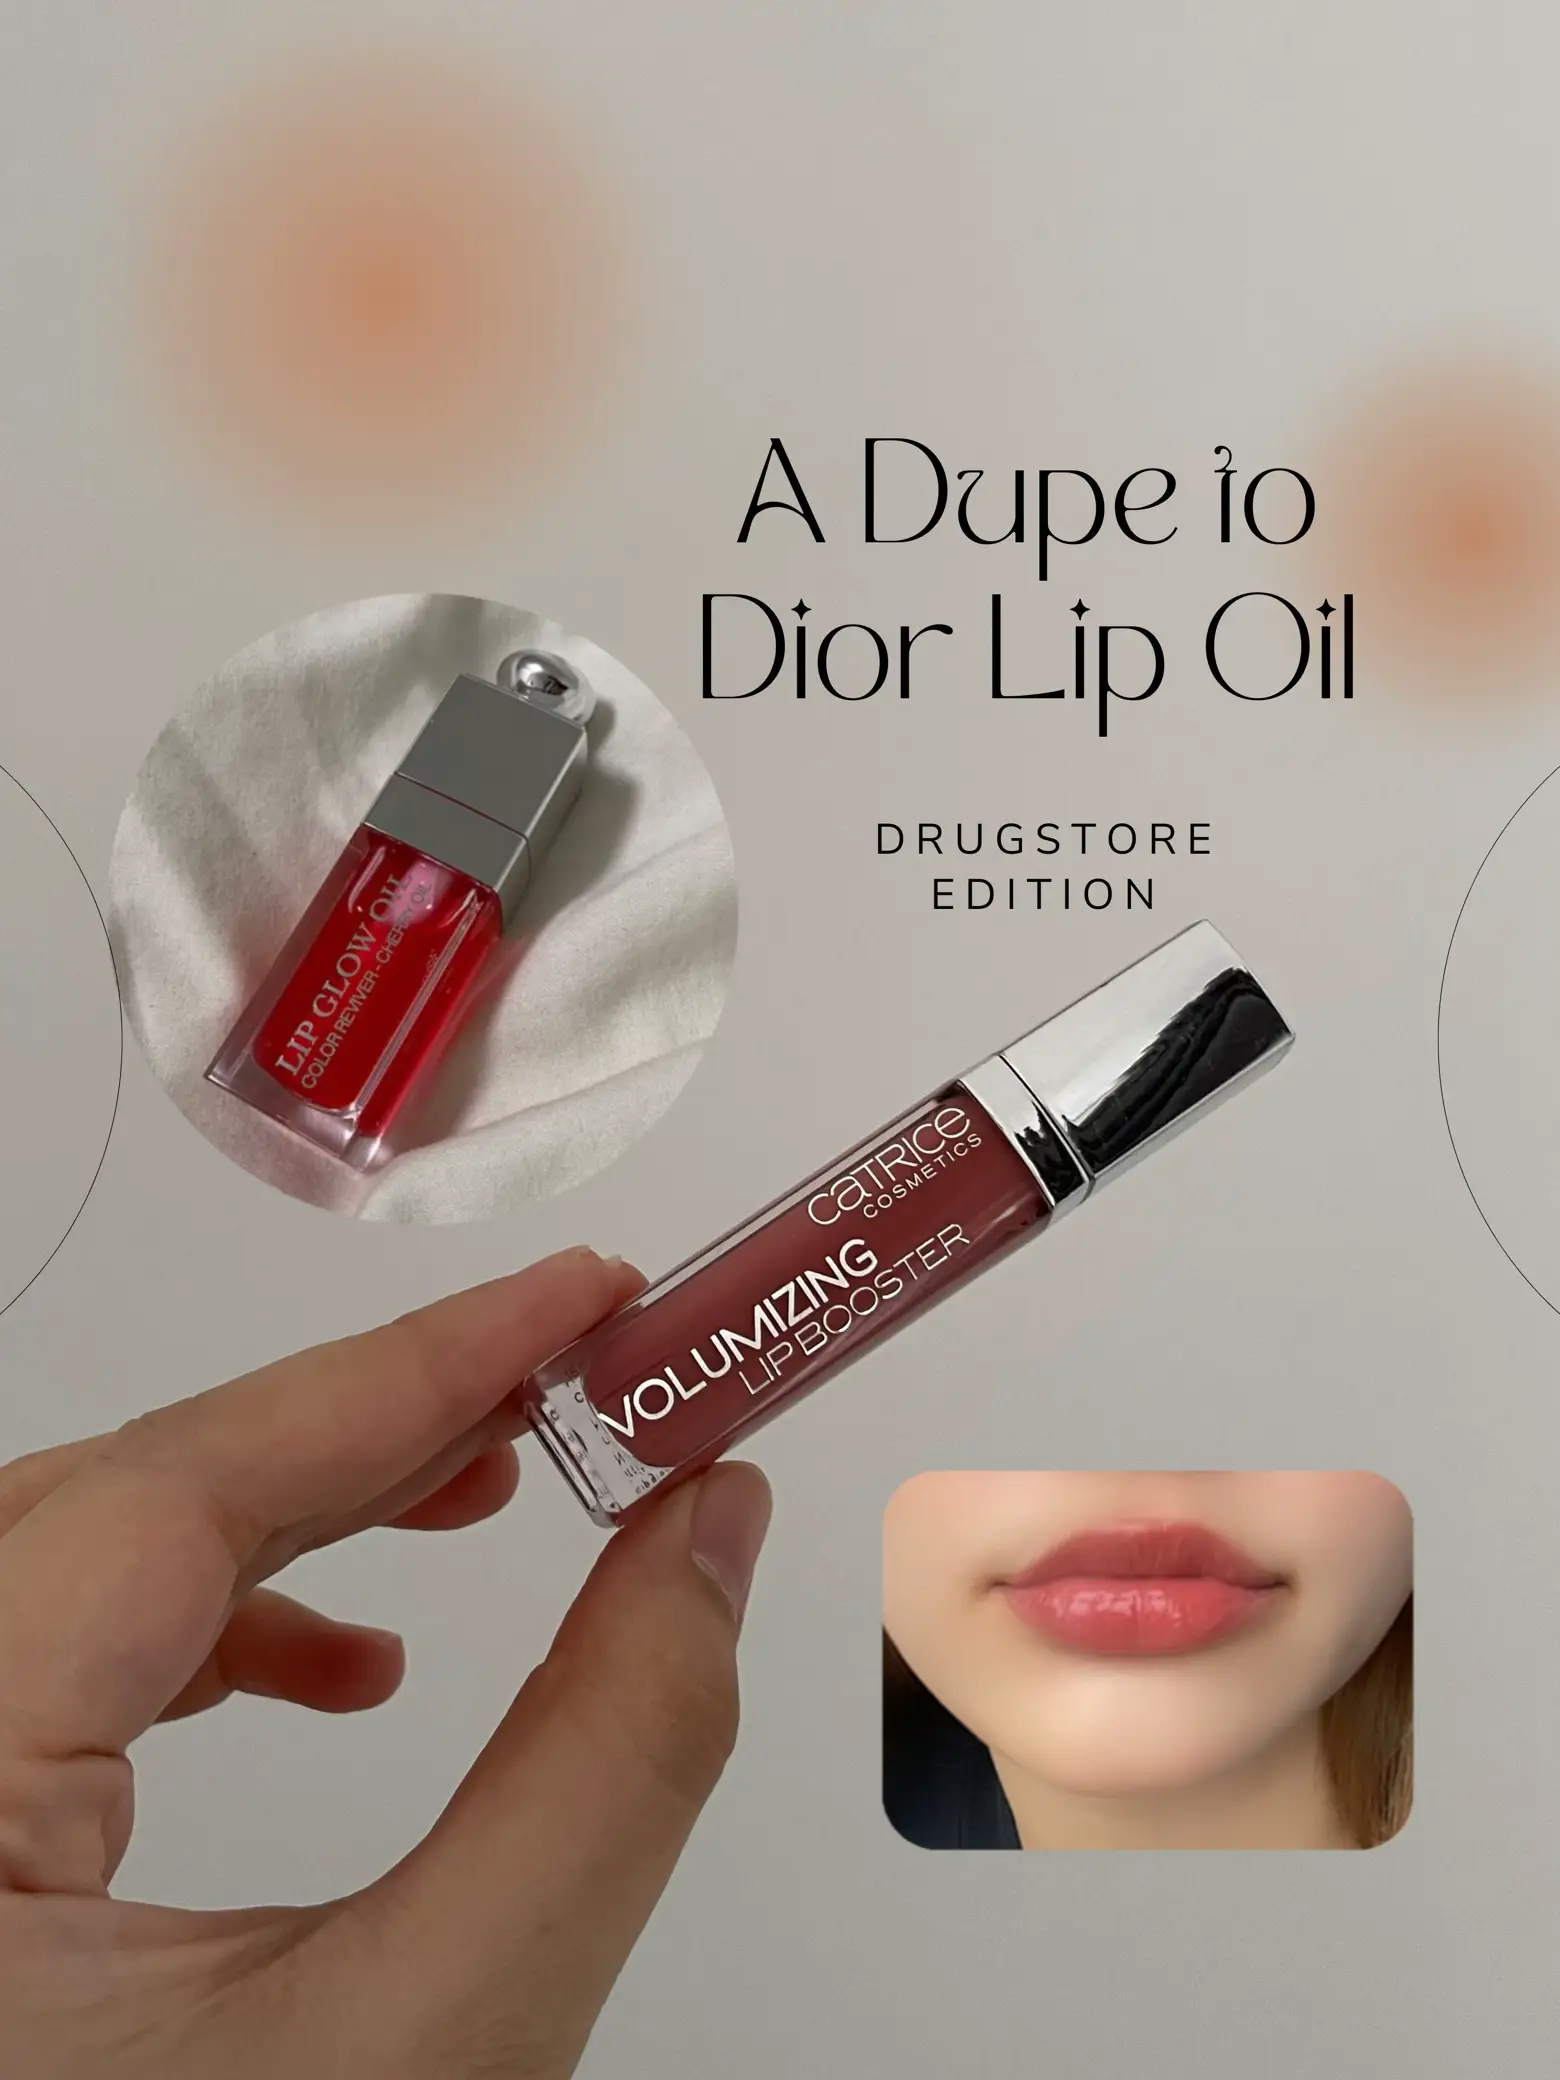 A DUPE TO DIOR LIP OIL?? DRUGSTORE EDITION